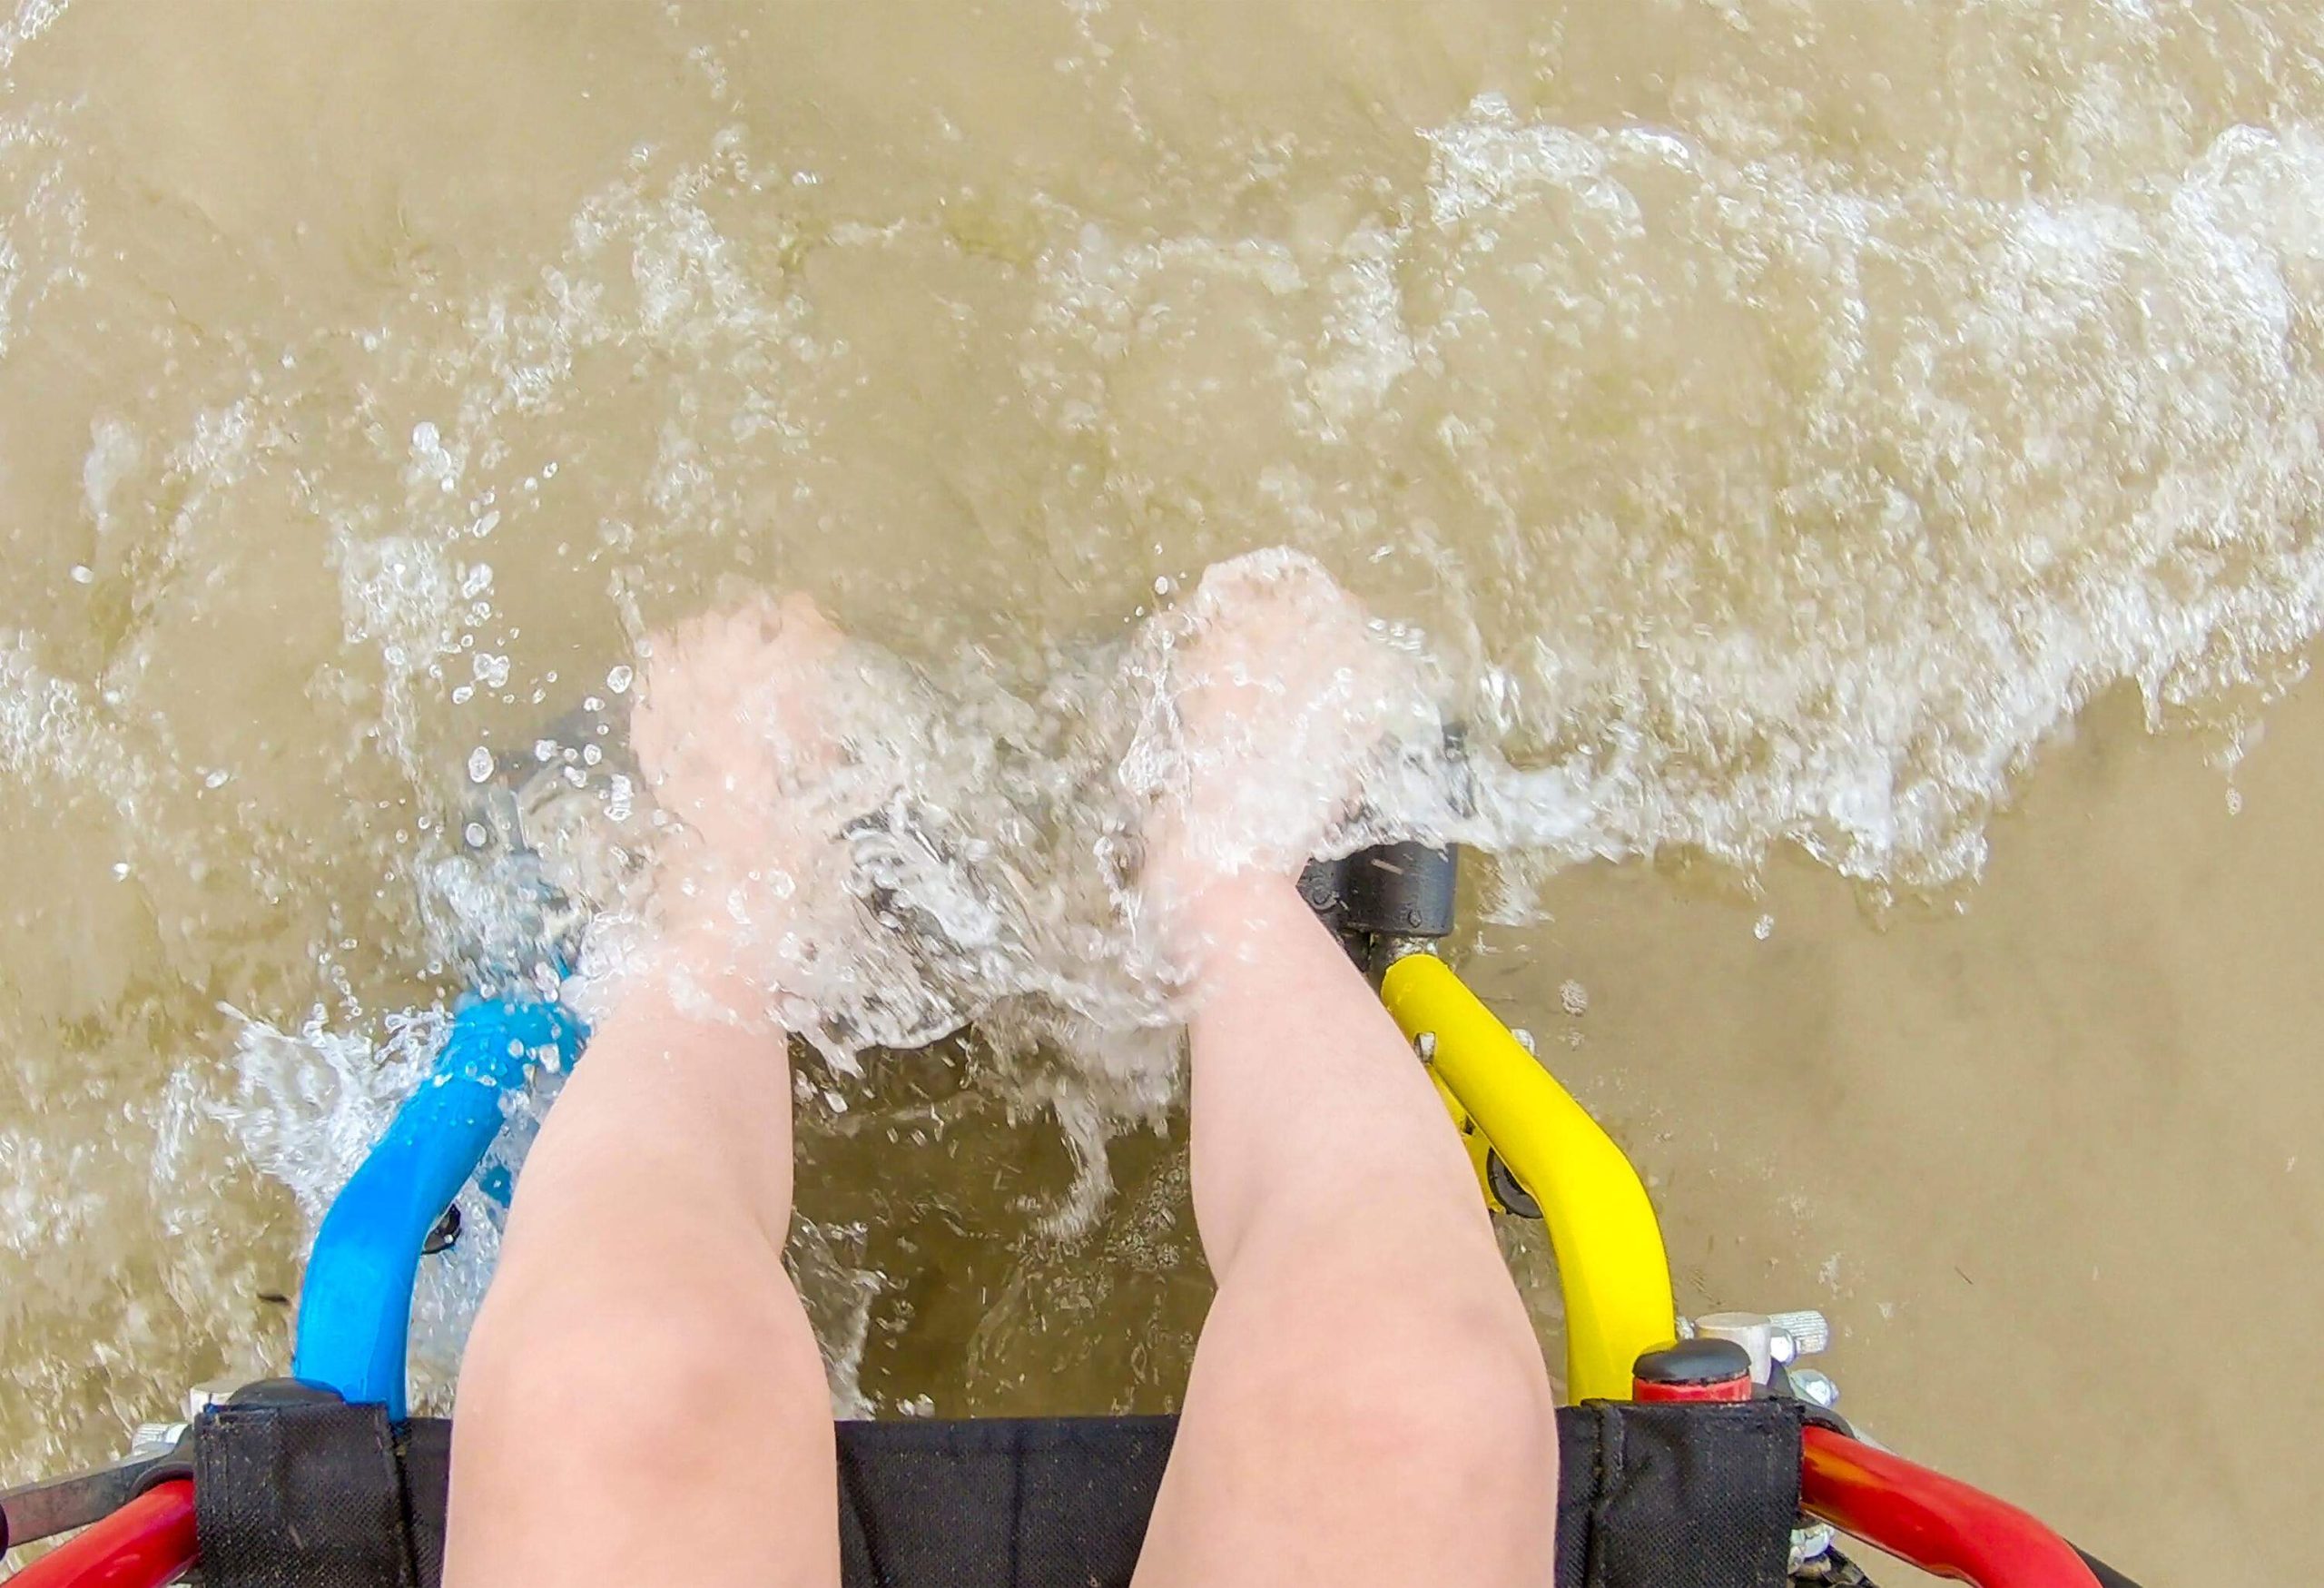 A wheelchair-bound person's feet being swashed by the waves.